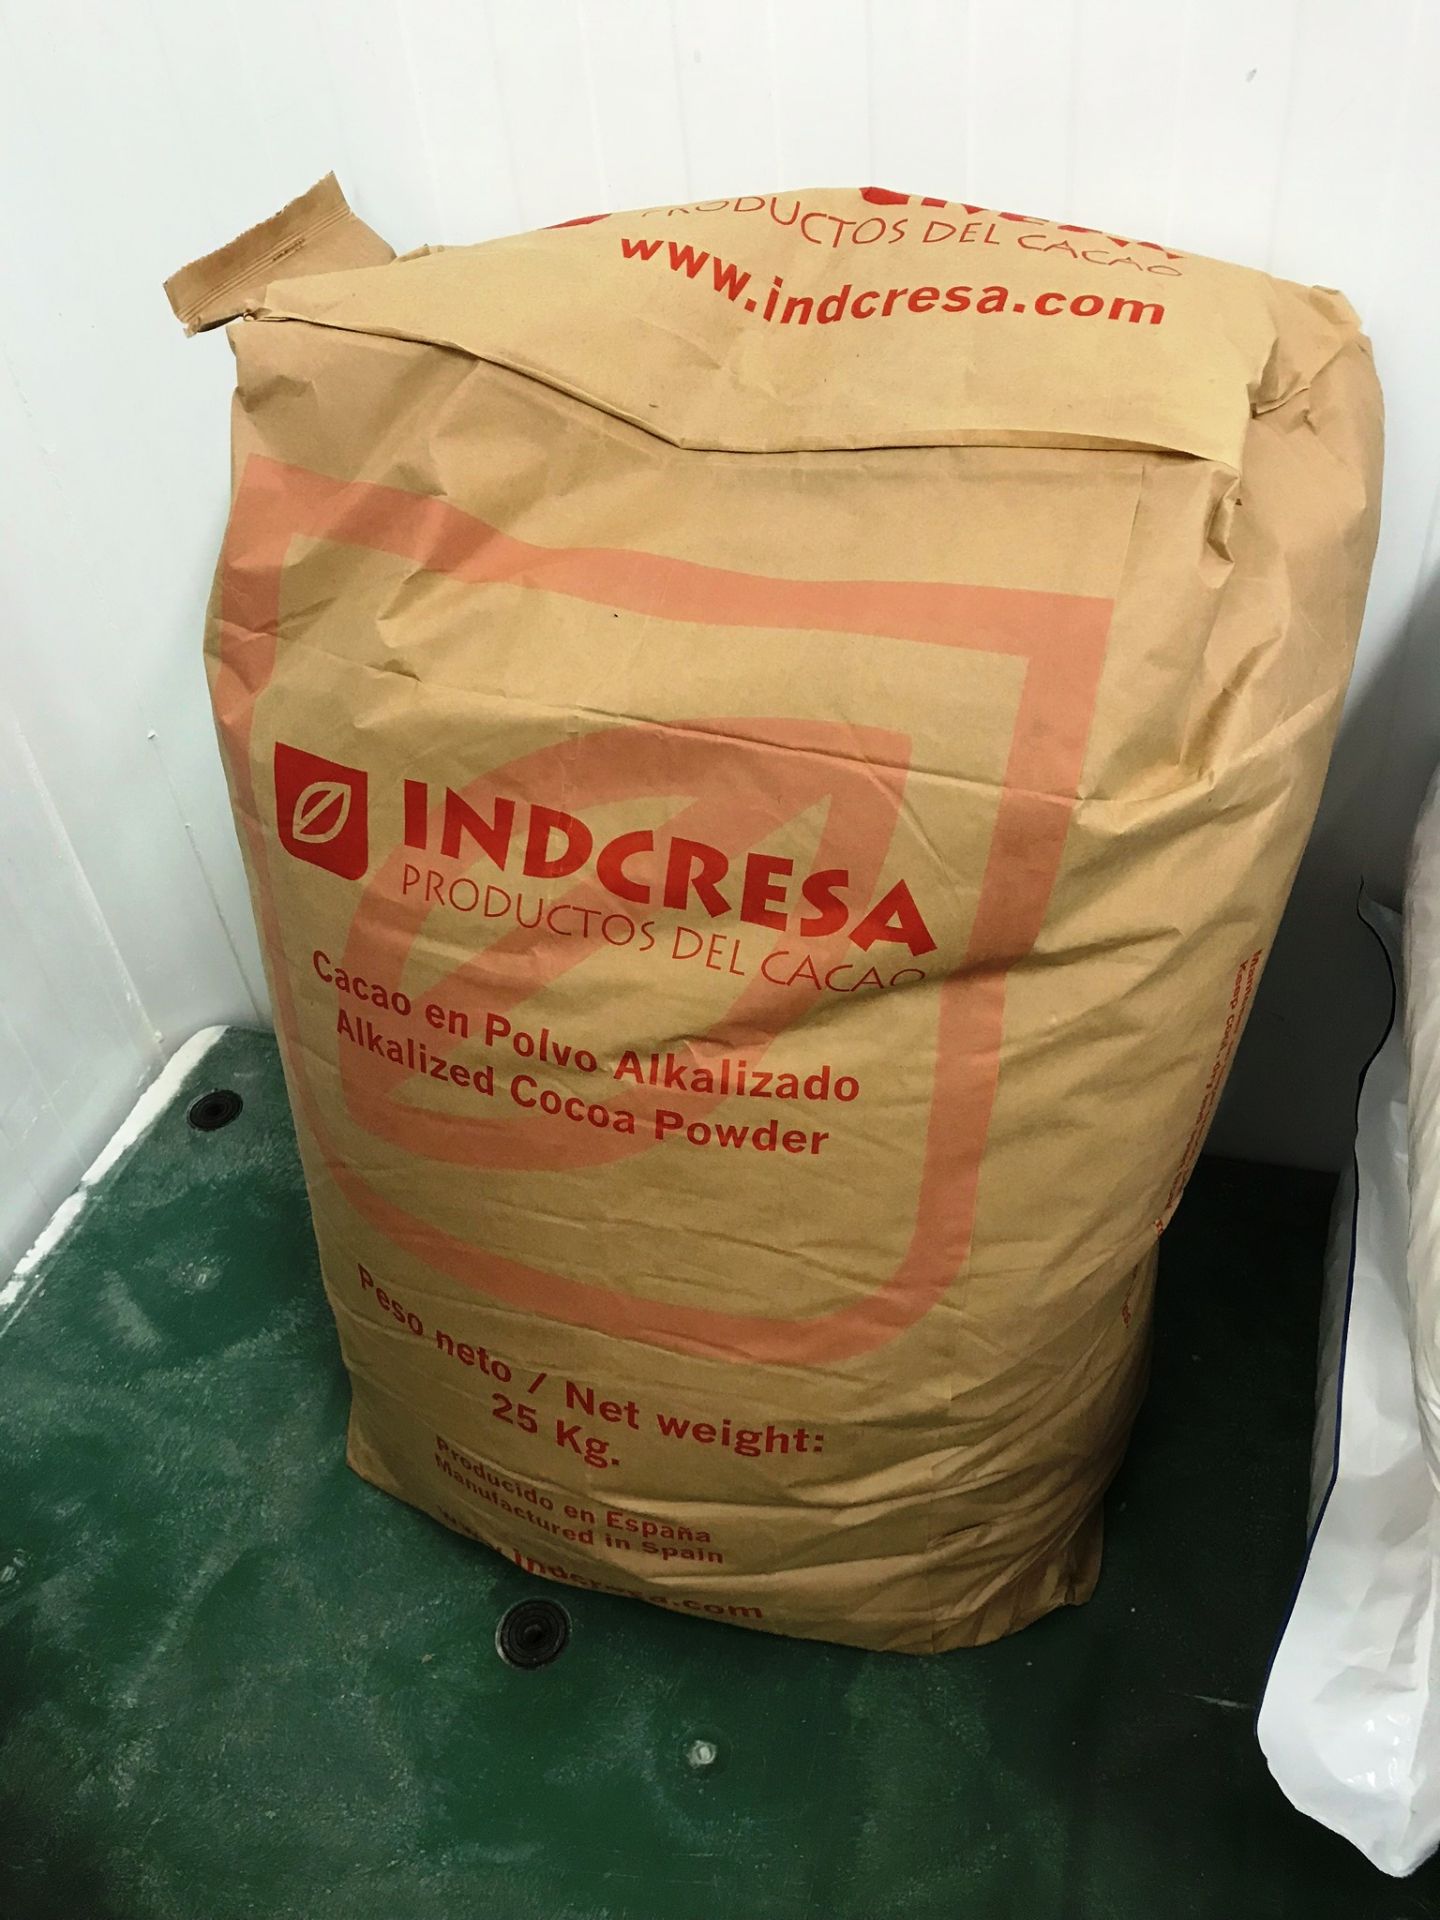 3 x 12.5kg Bags of Dark Chocolate Drops & 1 x 25kg of Indcresa Cocoa Powder - Image 4 of 4